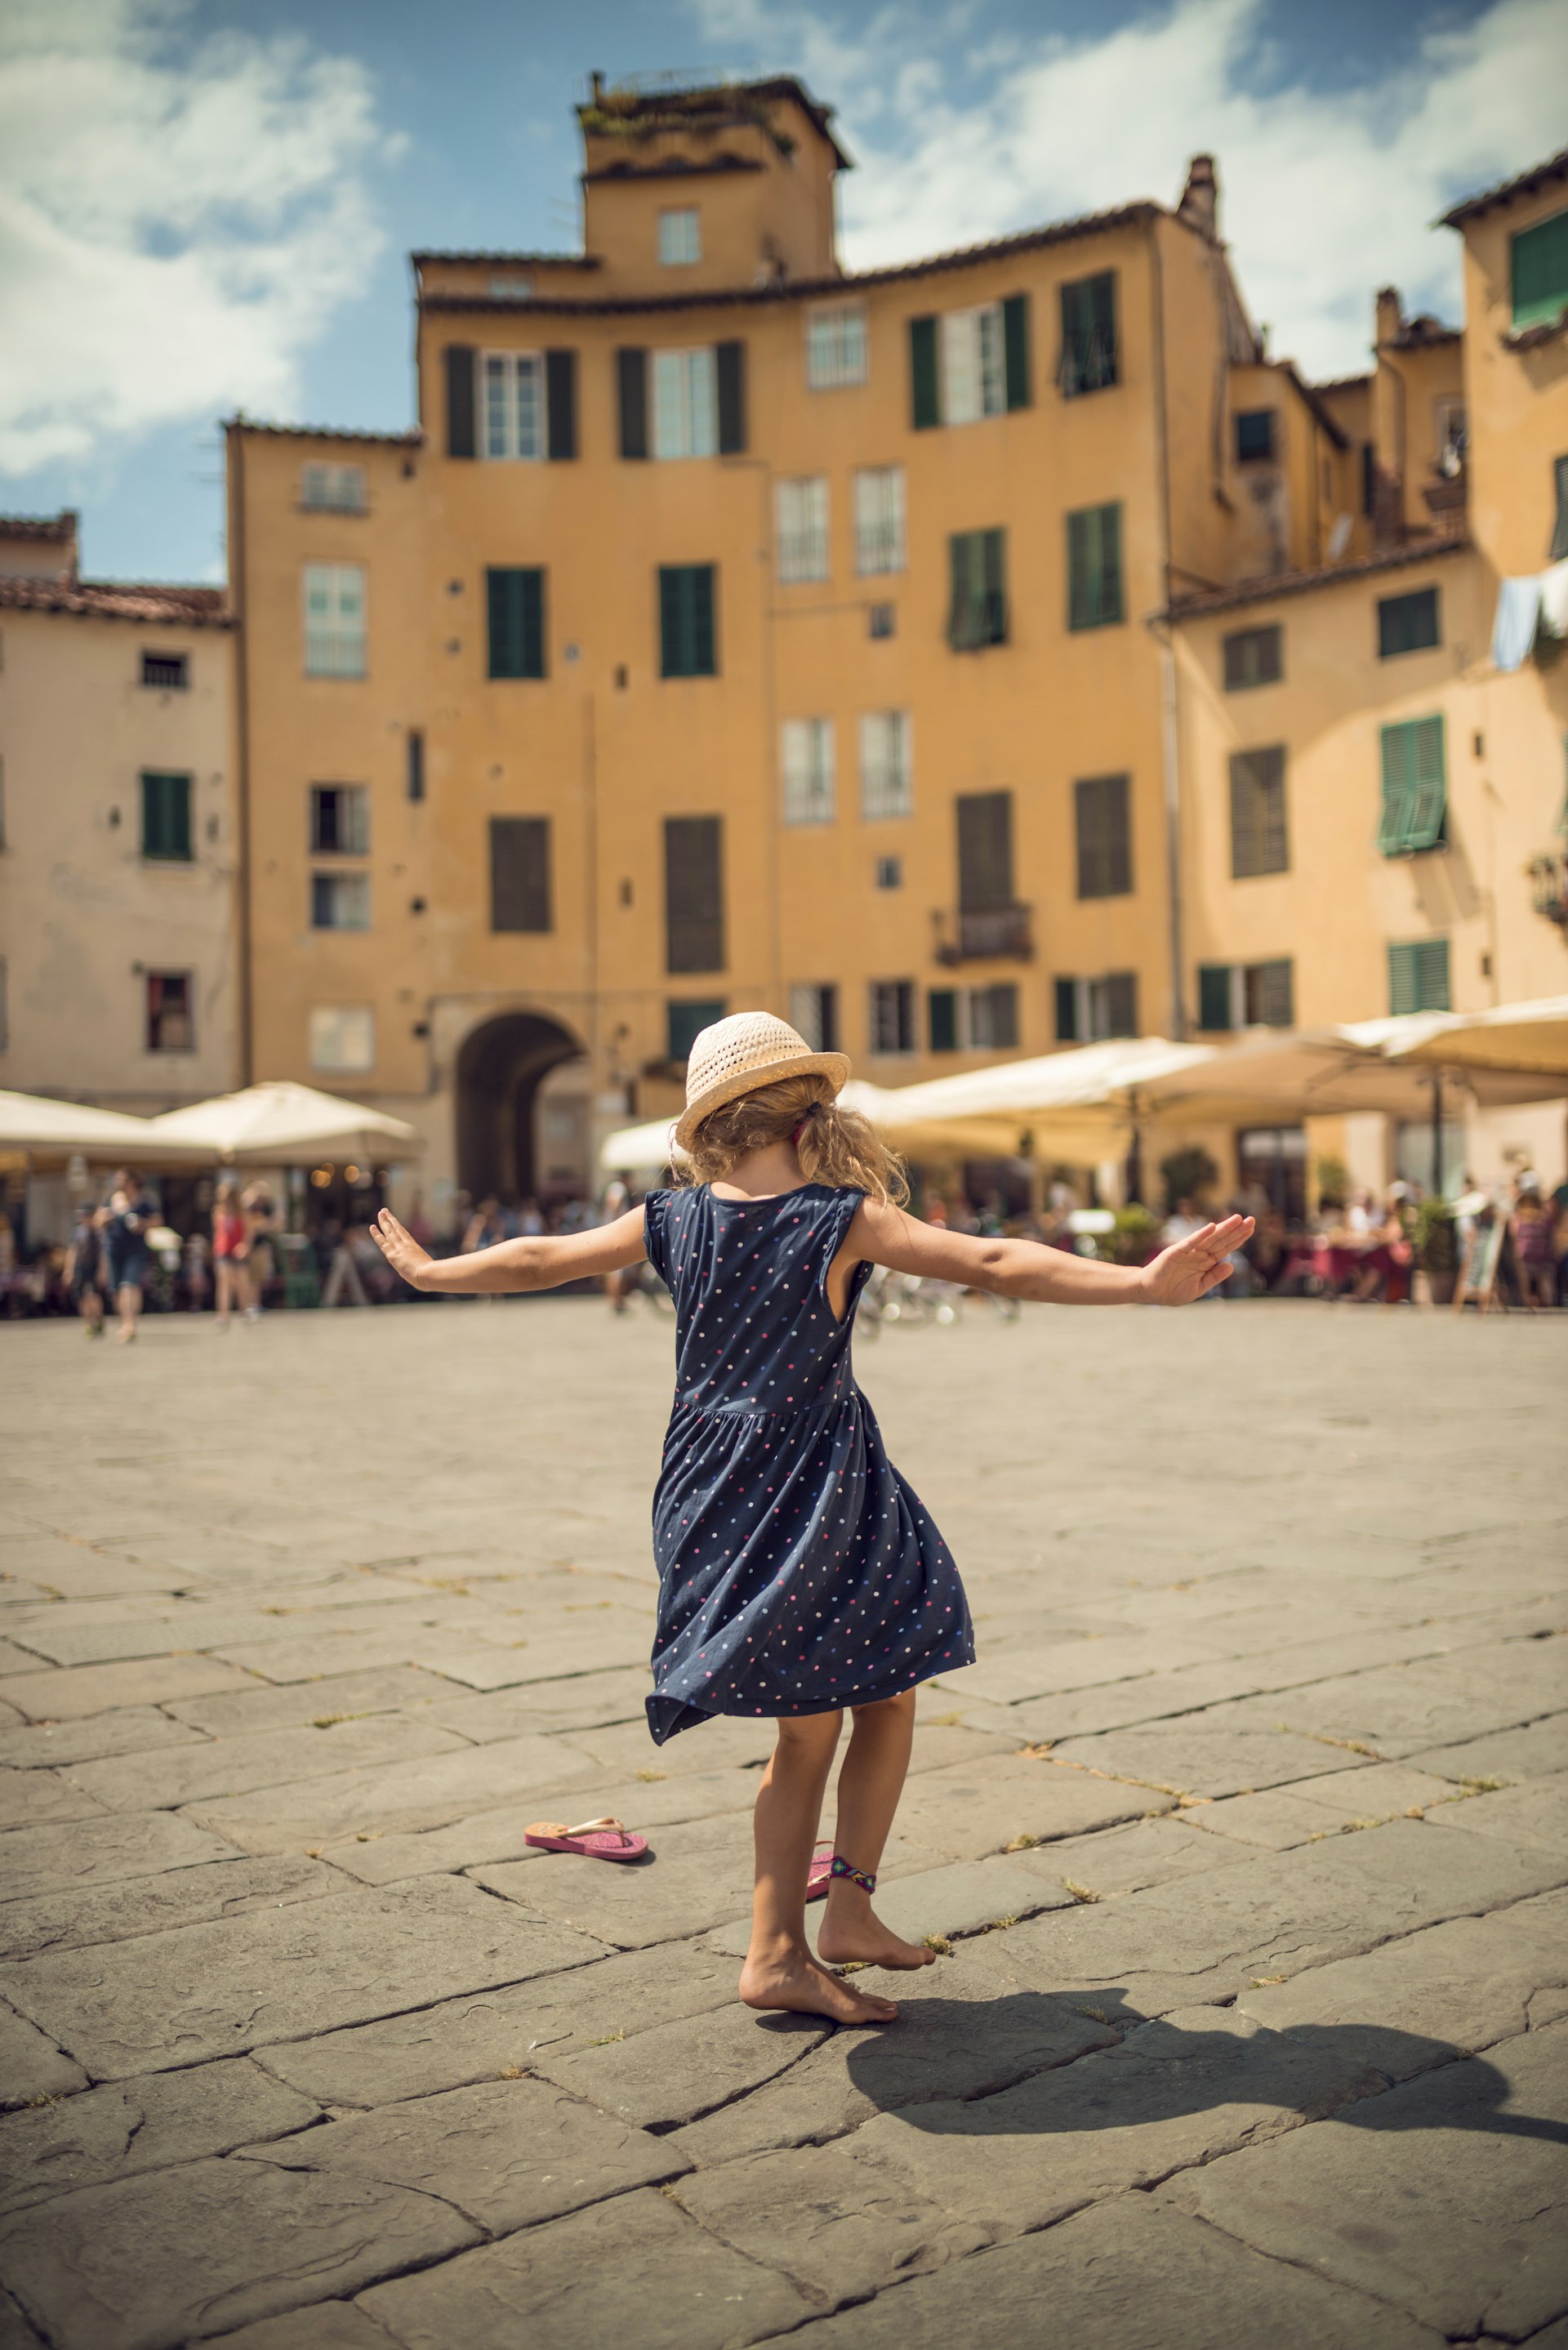 Back view of little girl dancing in a large public square surrounded by Renaissance buildings, and lined with umbrellas